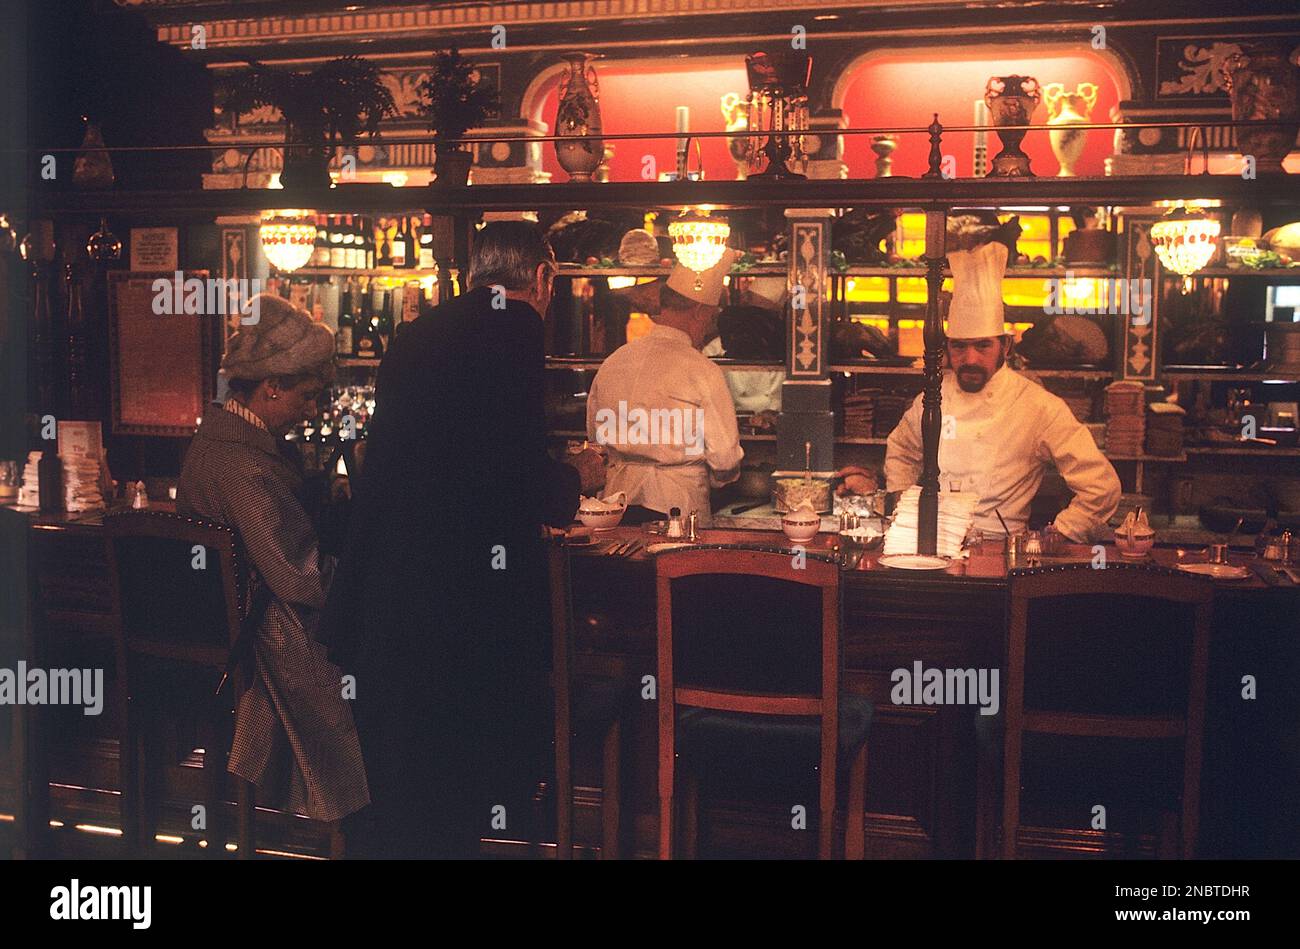 London 1972. A London restaurant interior with two chefs seen behind a counter. Kristoffersson ref DV7 Stock Photo